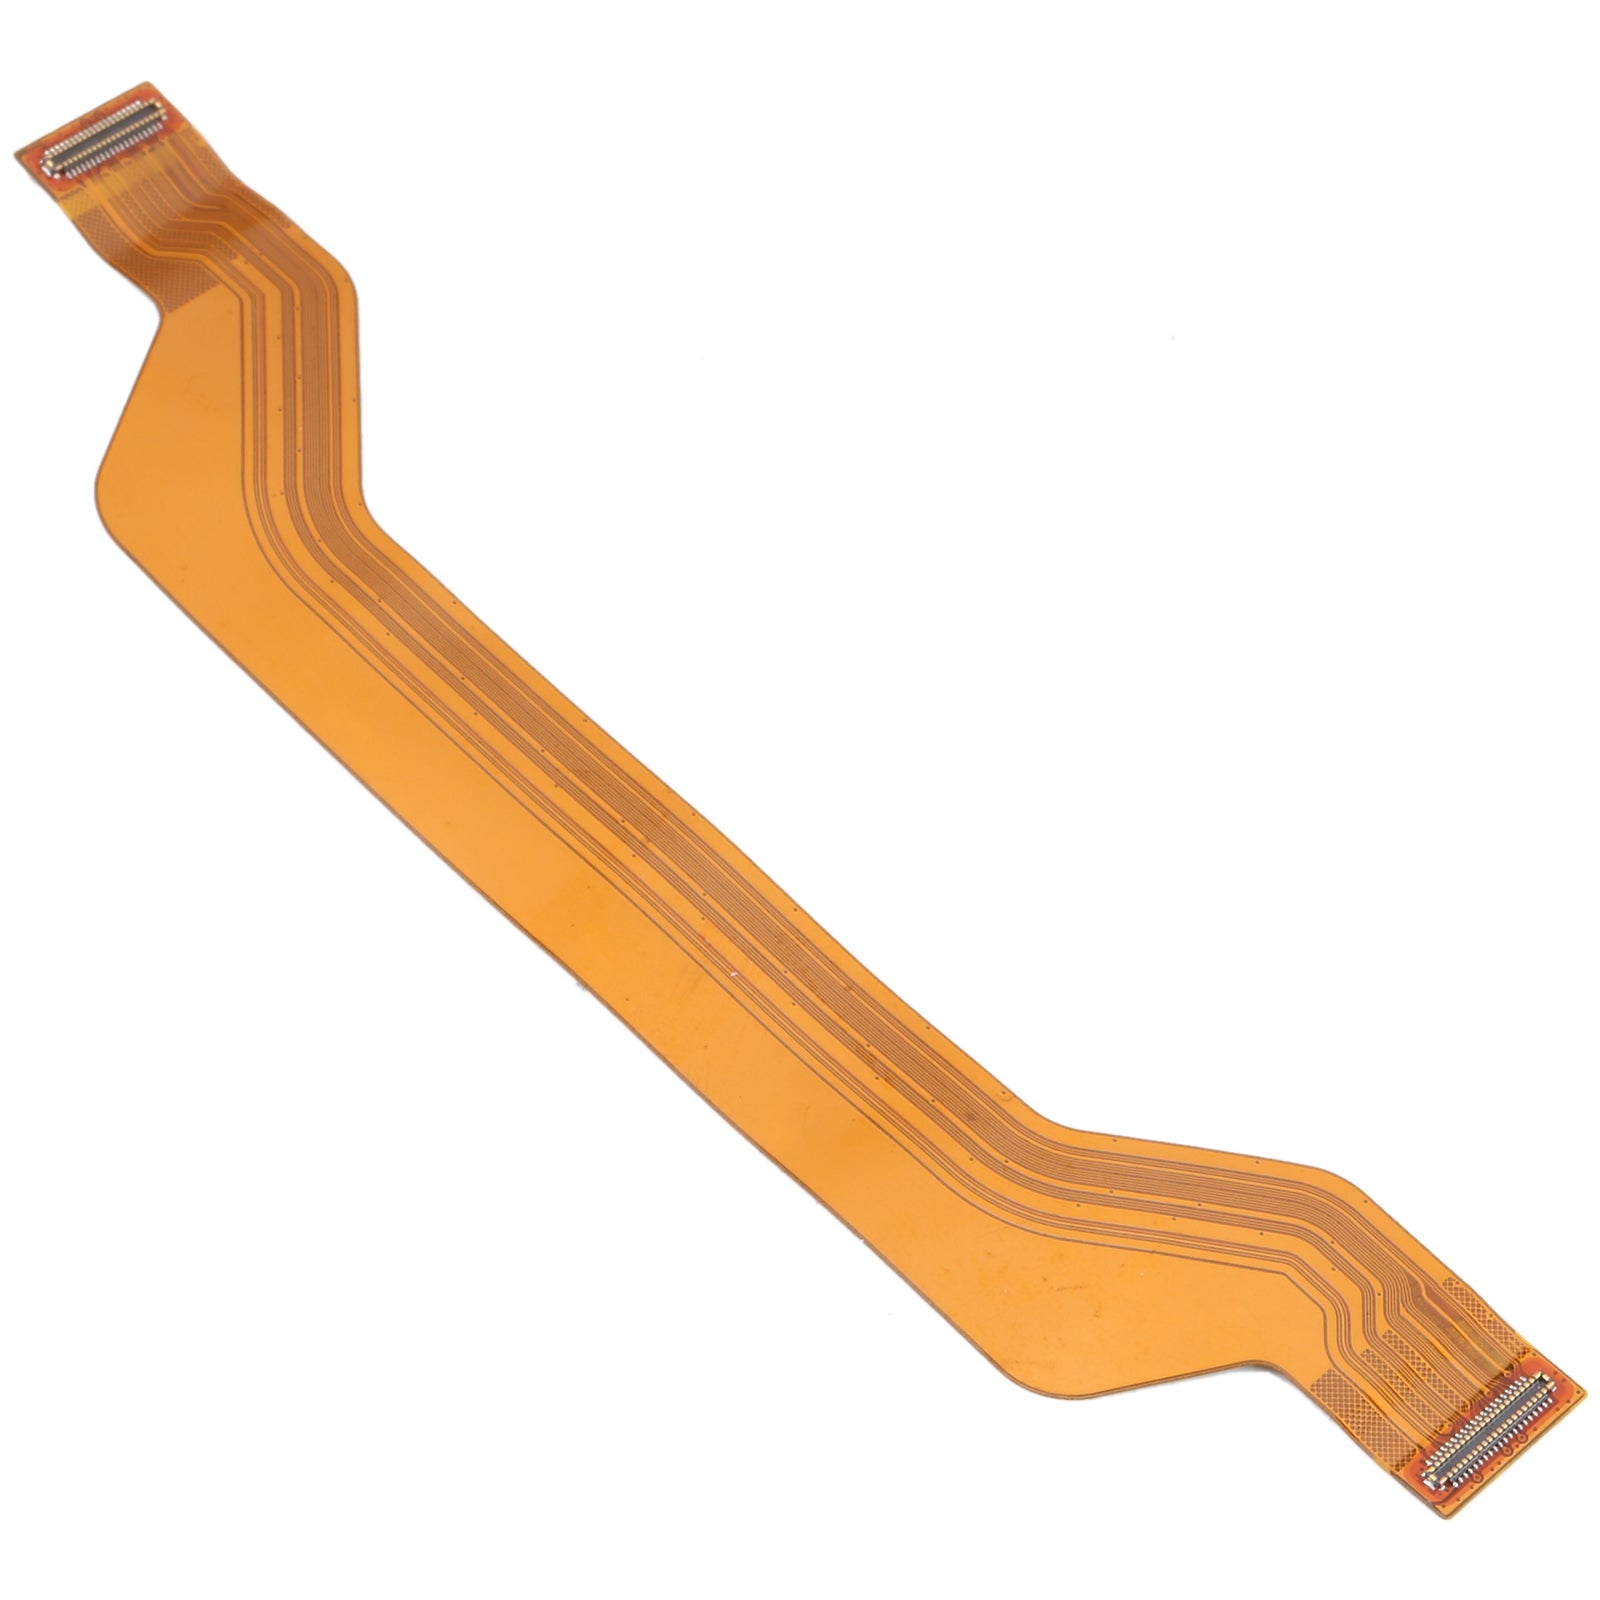 Board Connector Flex Cable for Huawei Maimang 10 SE